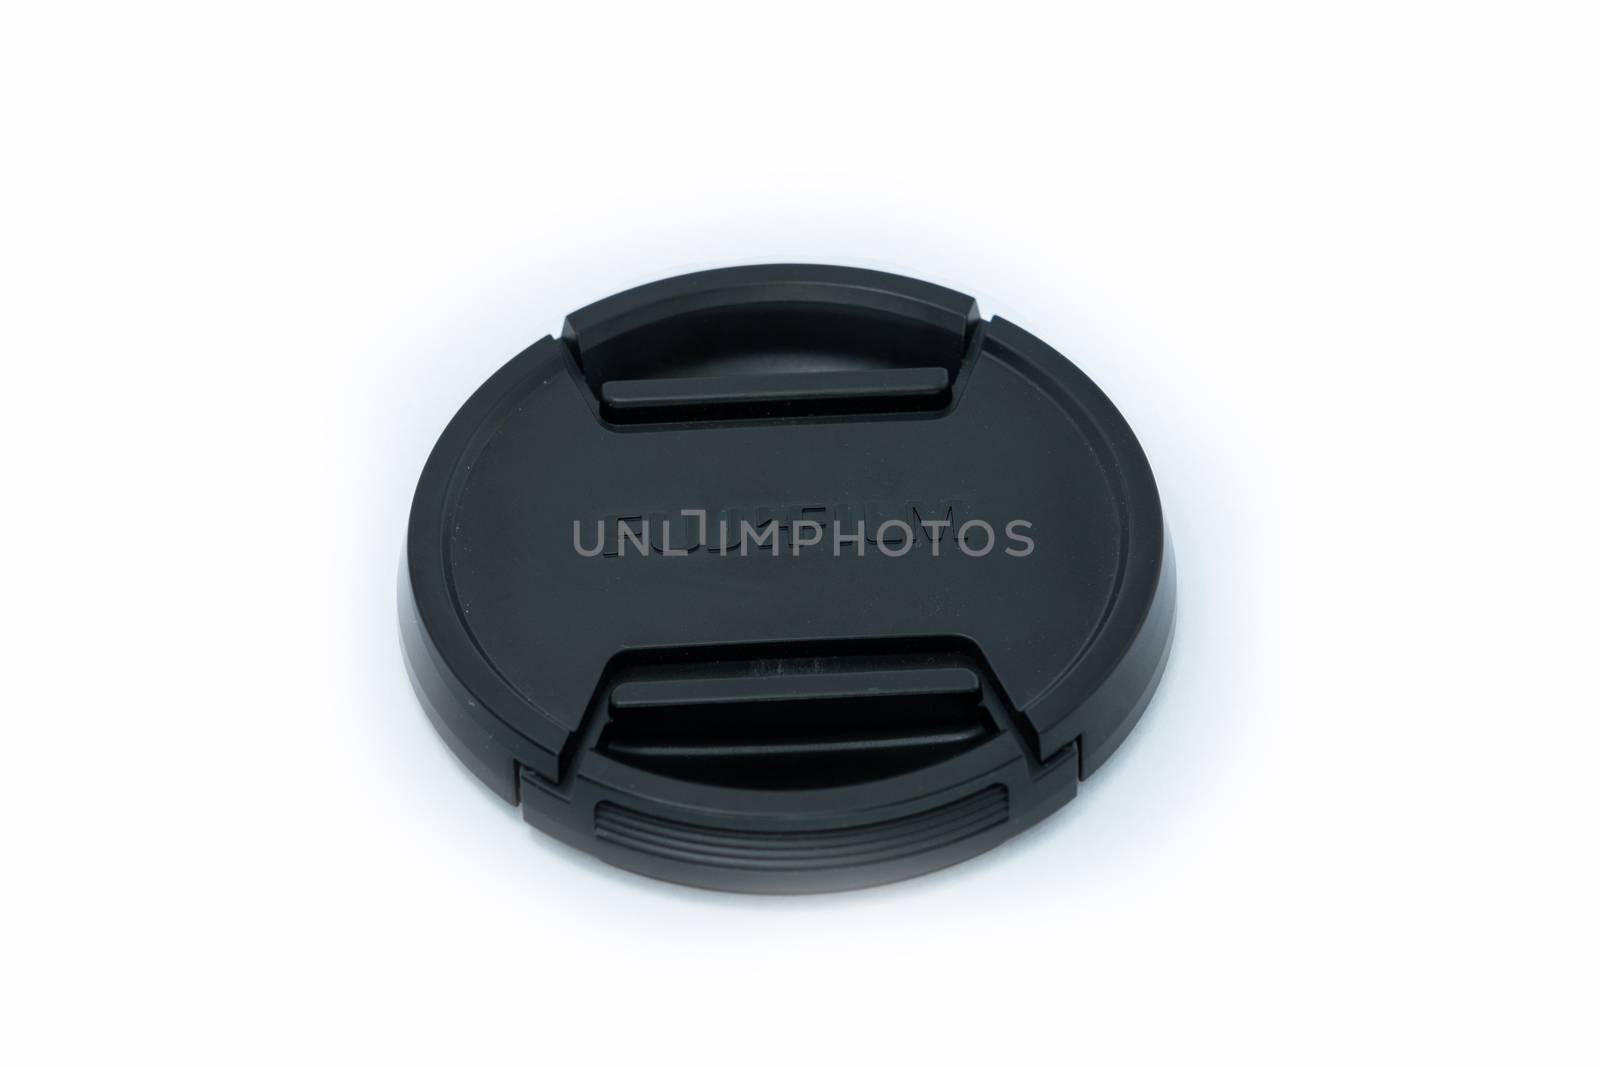 Chonburi, Thailand - MAY 20, 2020: Lens caps For Fujifilm lens on the withe background with space for put the text.